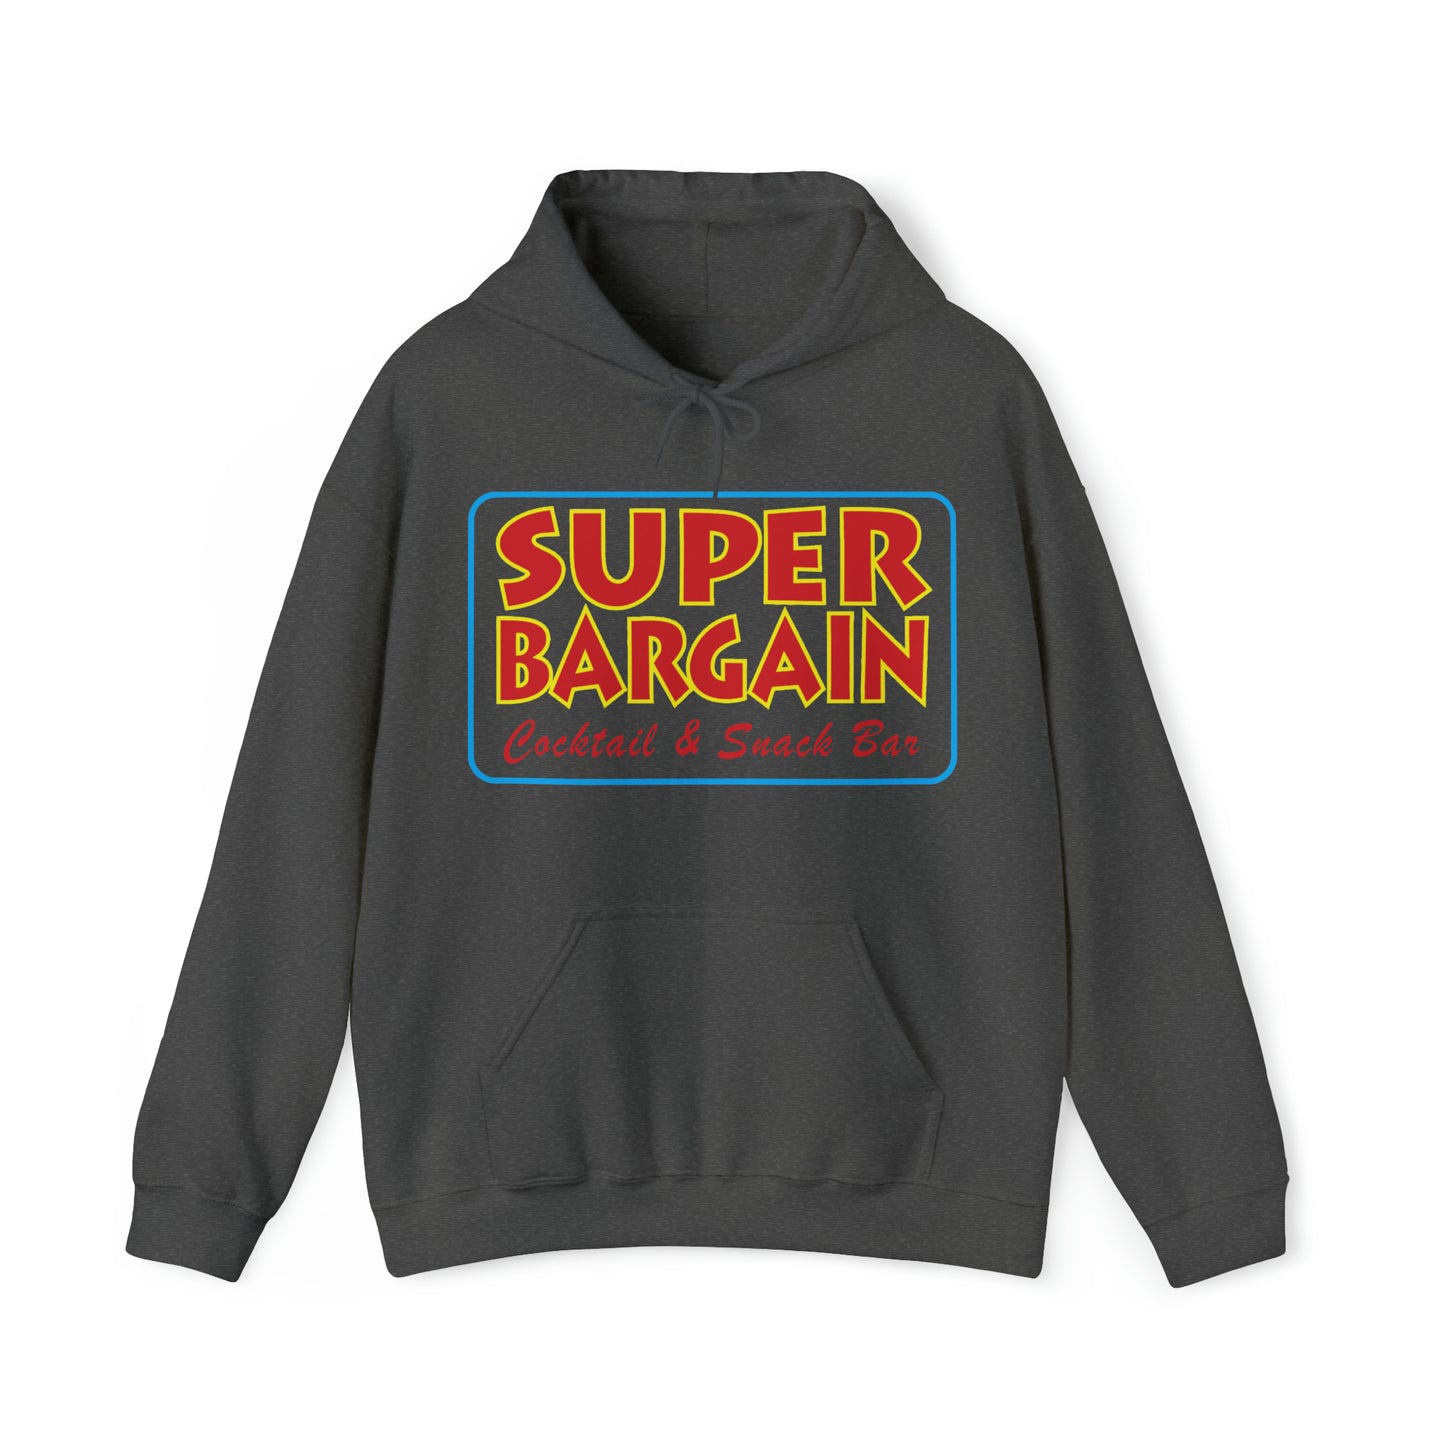 A dark gray Unisex Heavy Blend™ Hooded Sweatshirt featuring a colorful logo that reads "SUPER BARGAIN Cocktail & Snack Bar, Cabbagetown Toronto" in yellow and red with white outlining, displayed on a plain white background. (Printify)